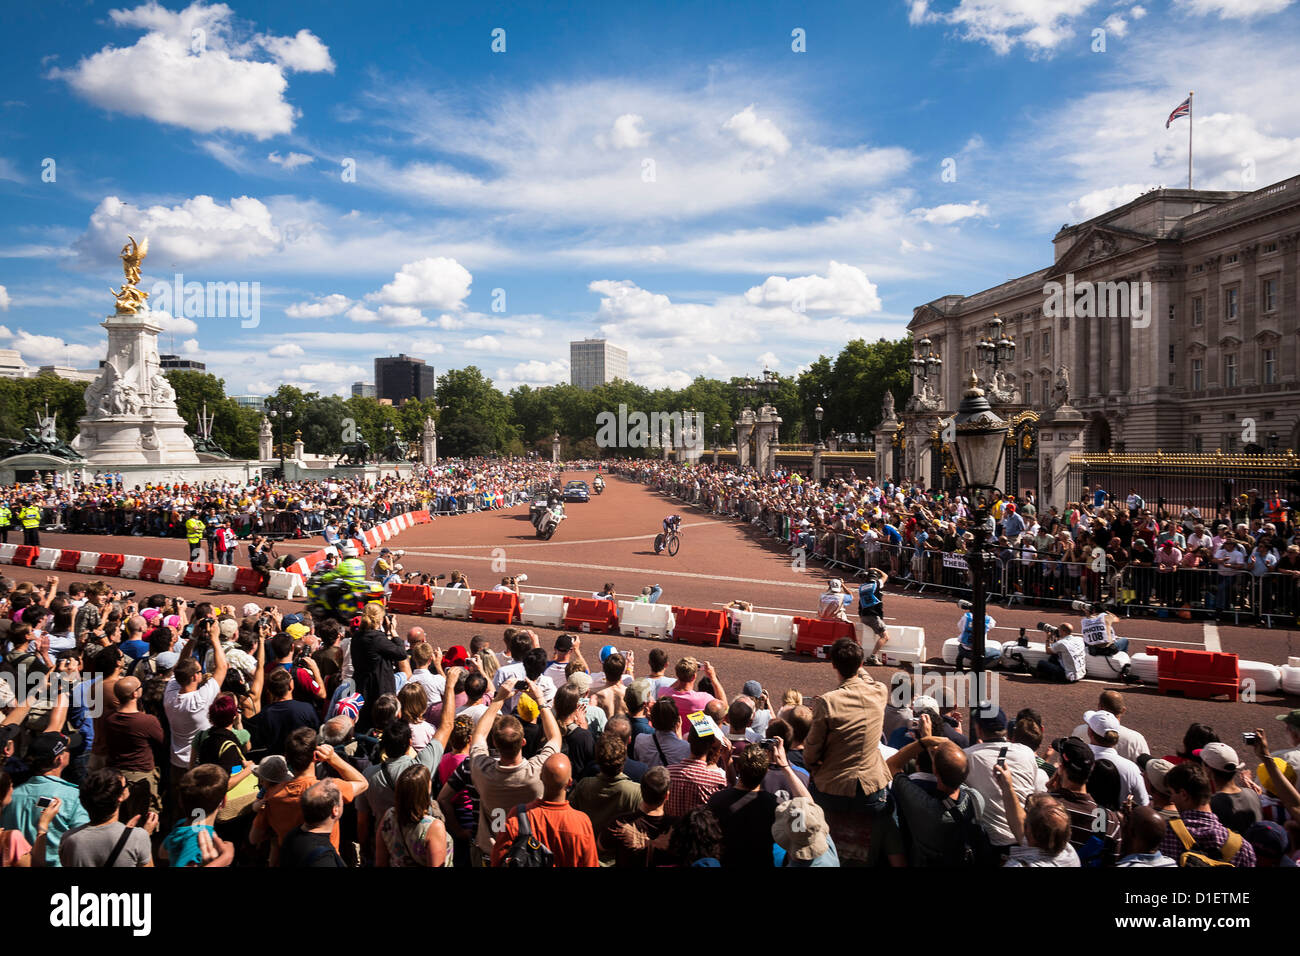 Crowds cheer as cyclists ride past Buckingham Palace during the Tour de France prologue, London, United Kingdom, 2007 Stock Photo